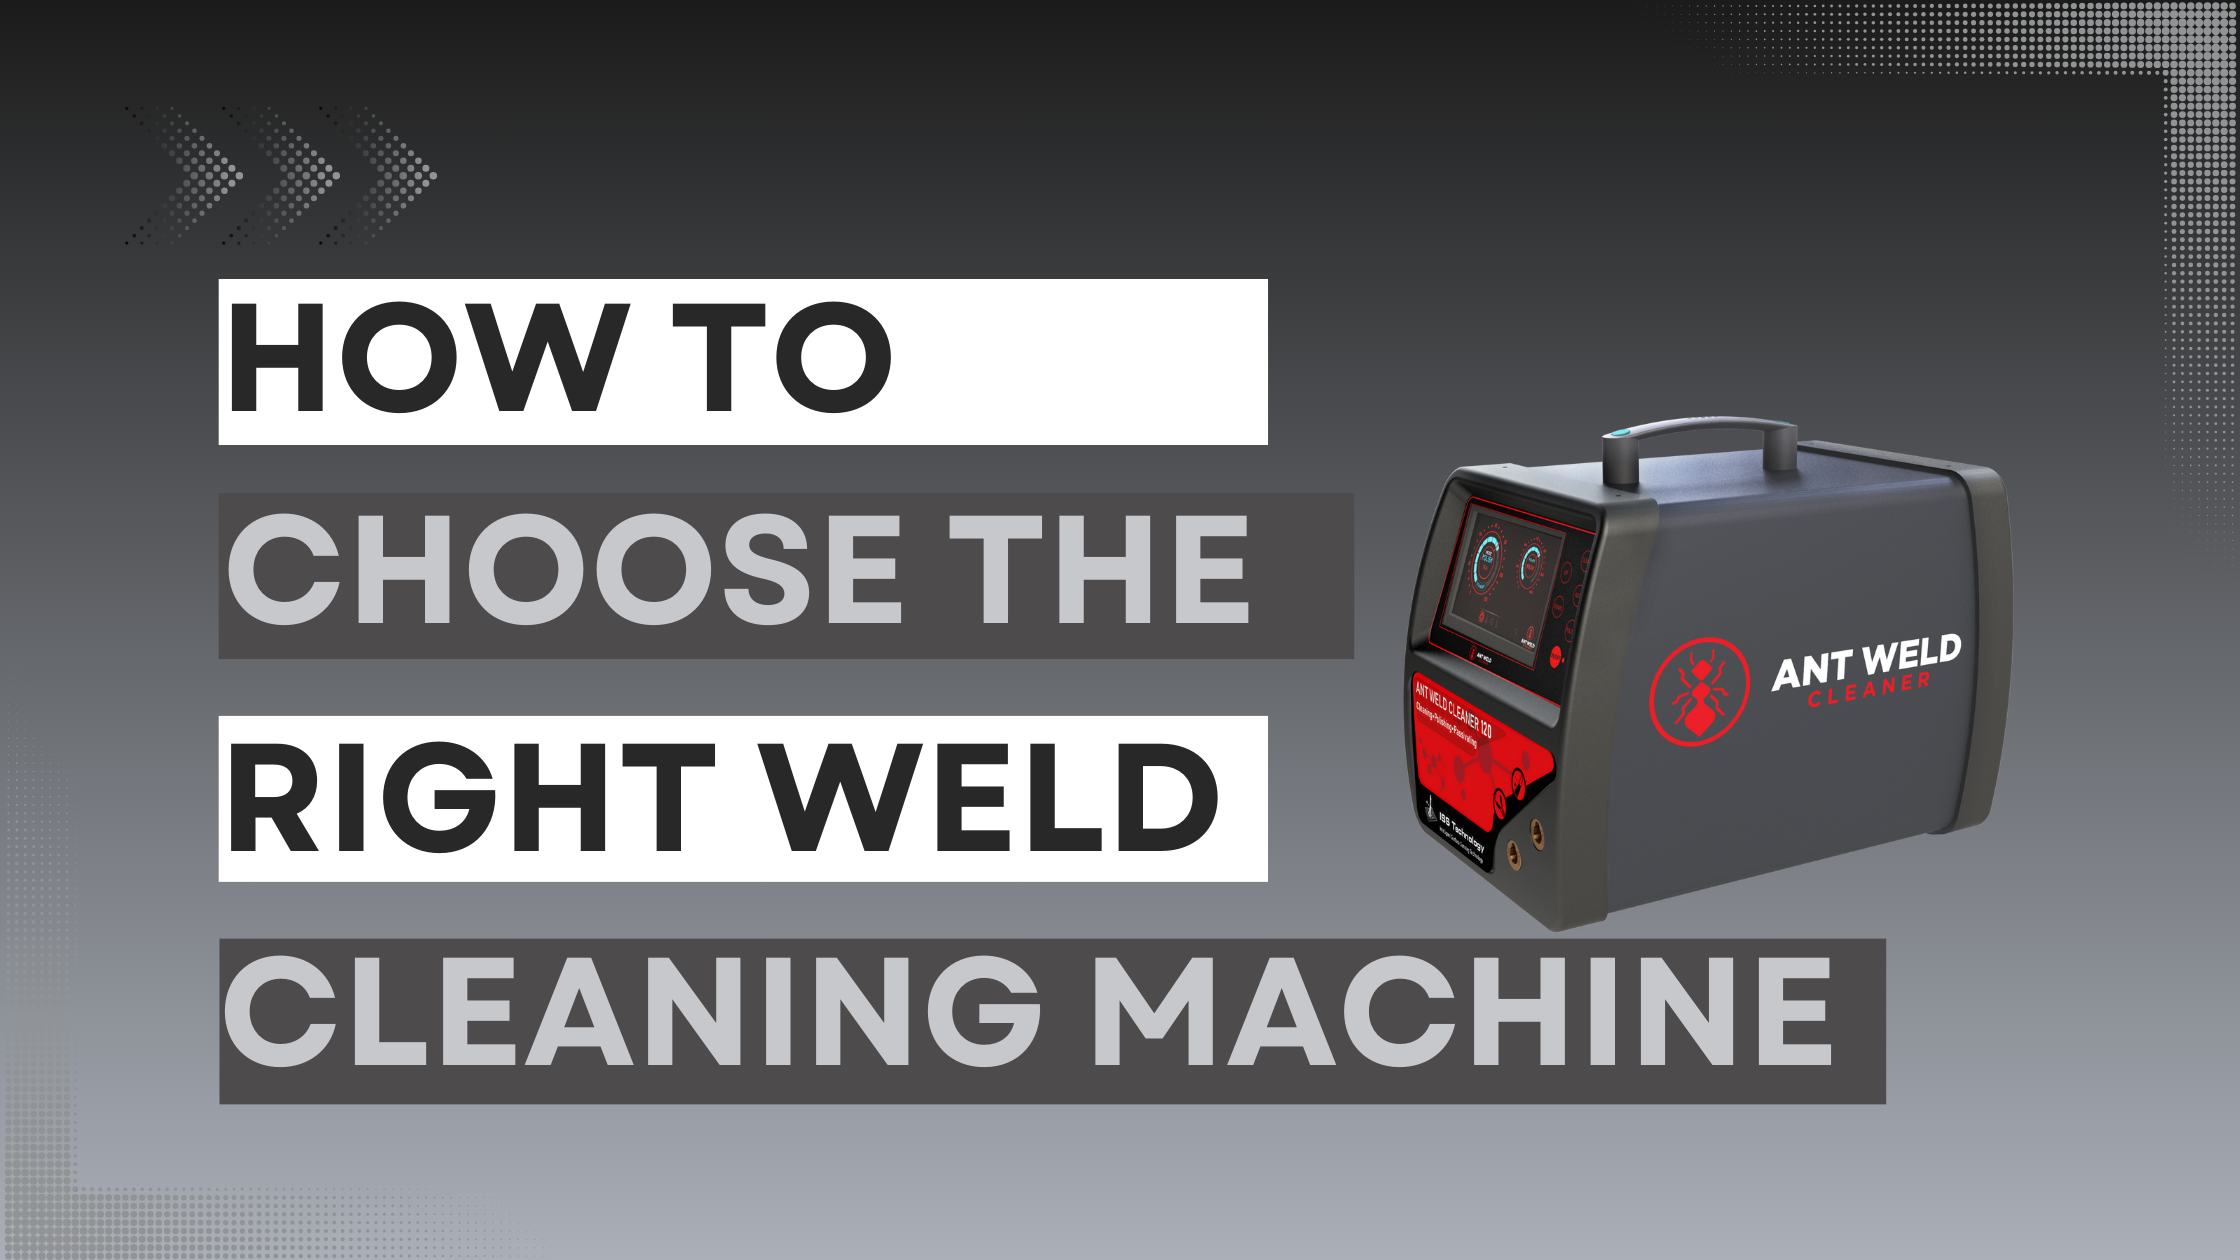 Ant Weld Cleaner How to choose the right weld cleaner